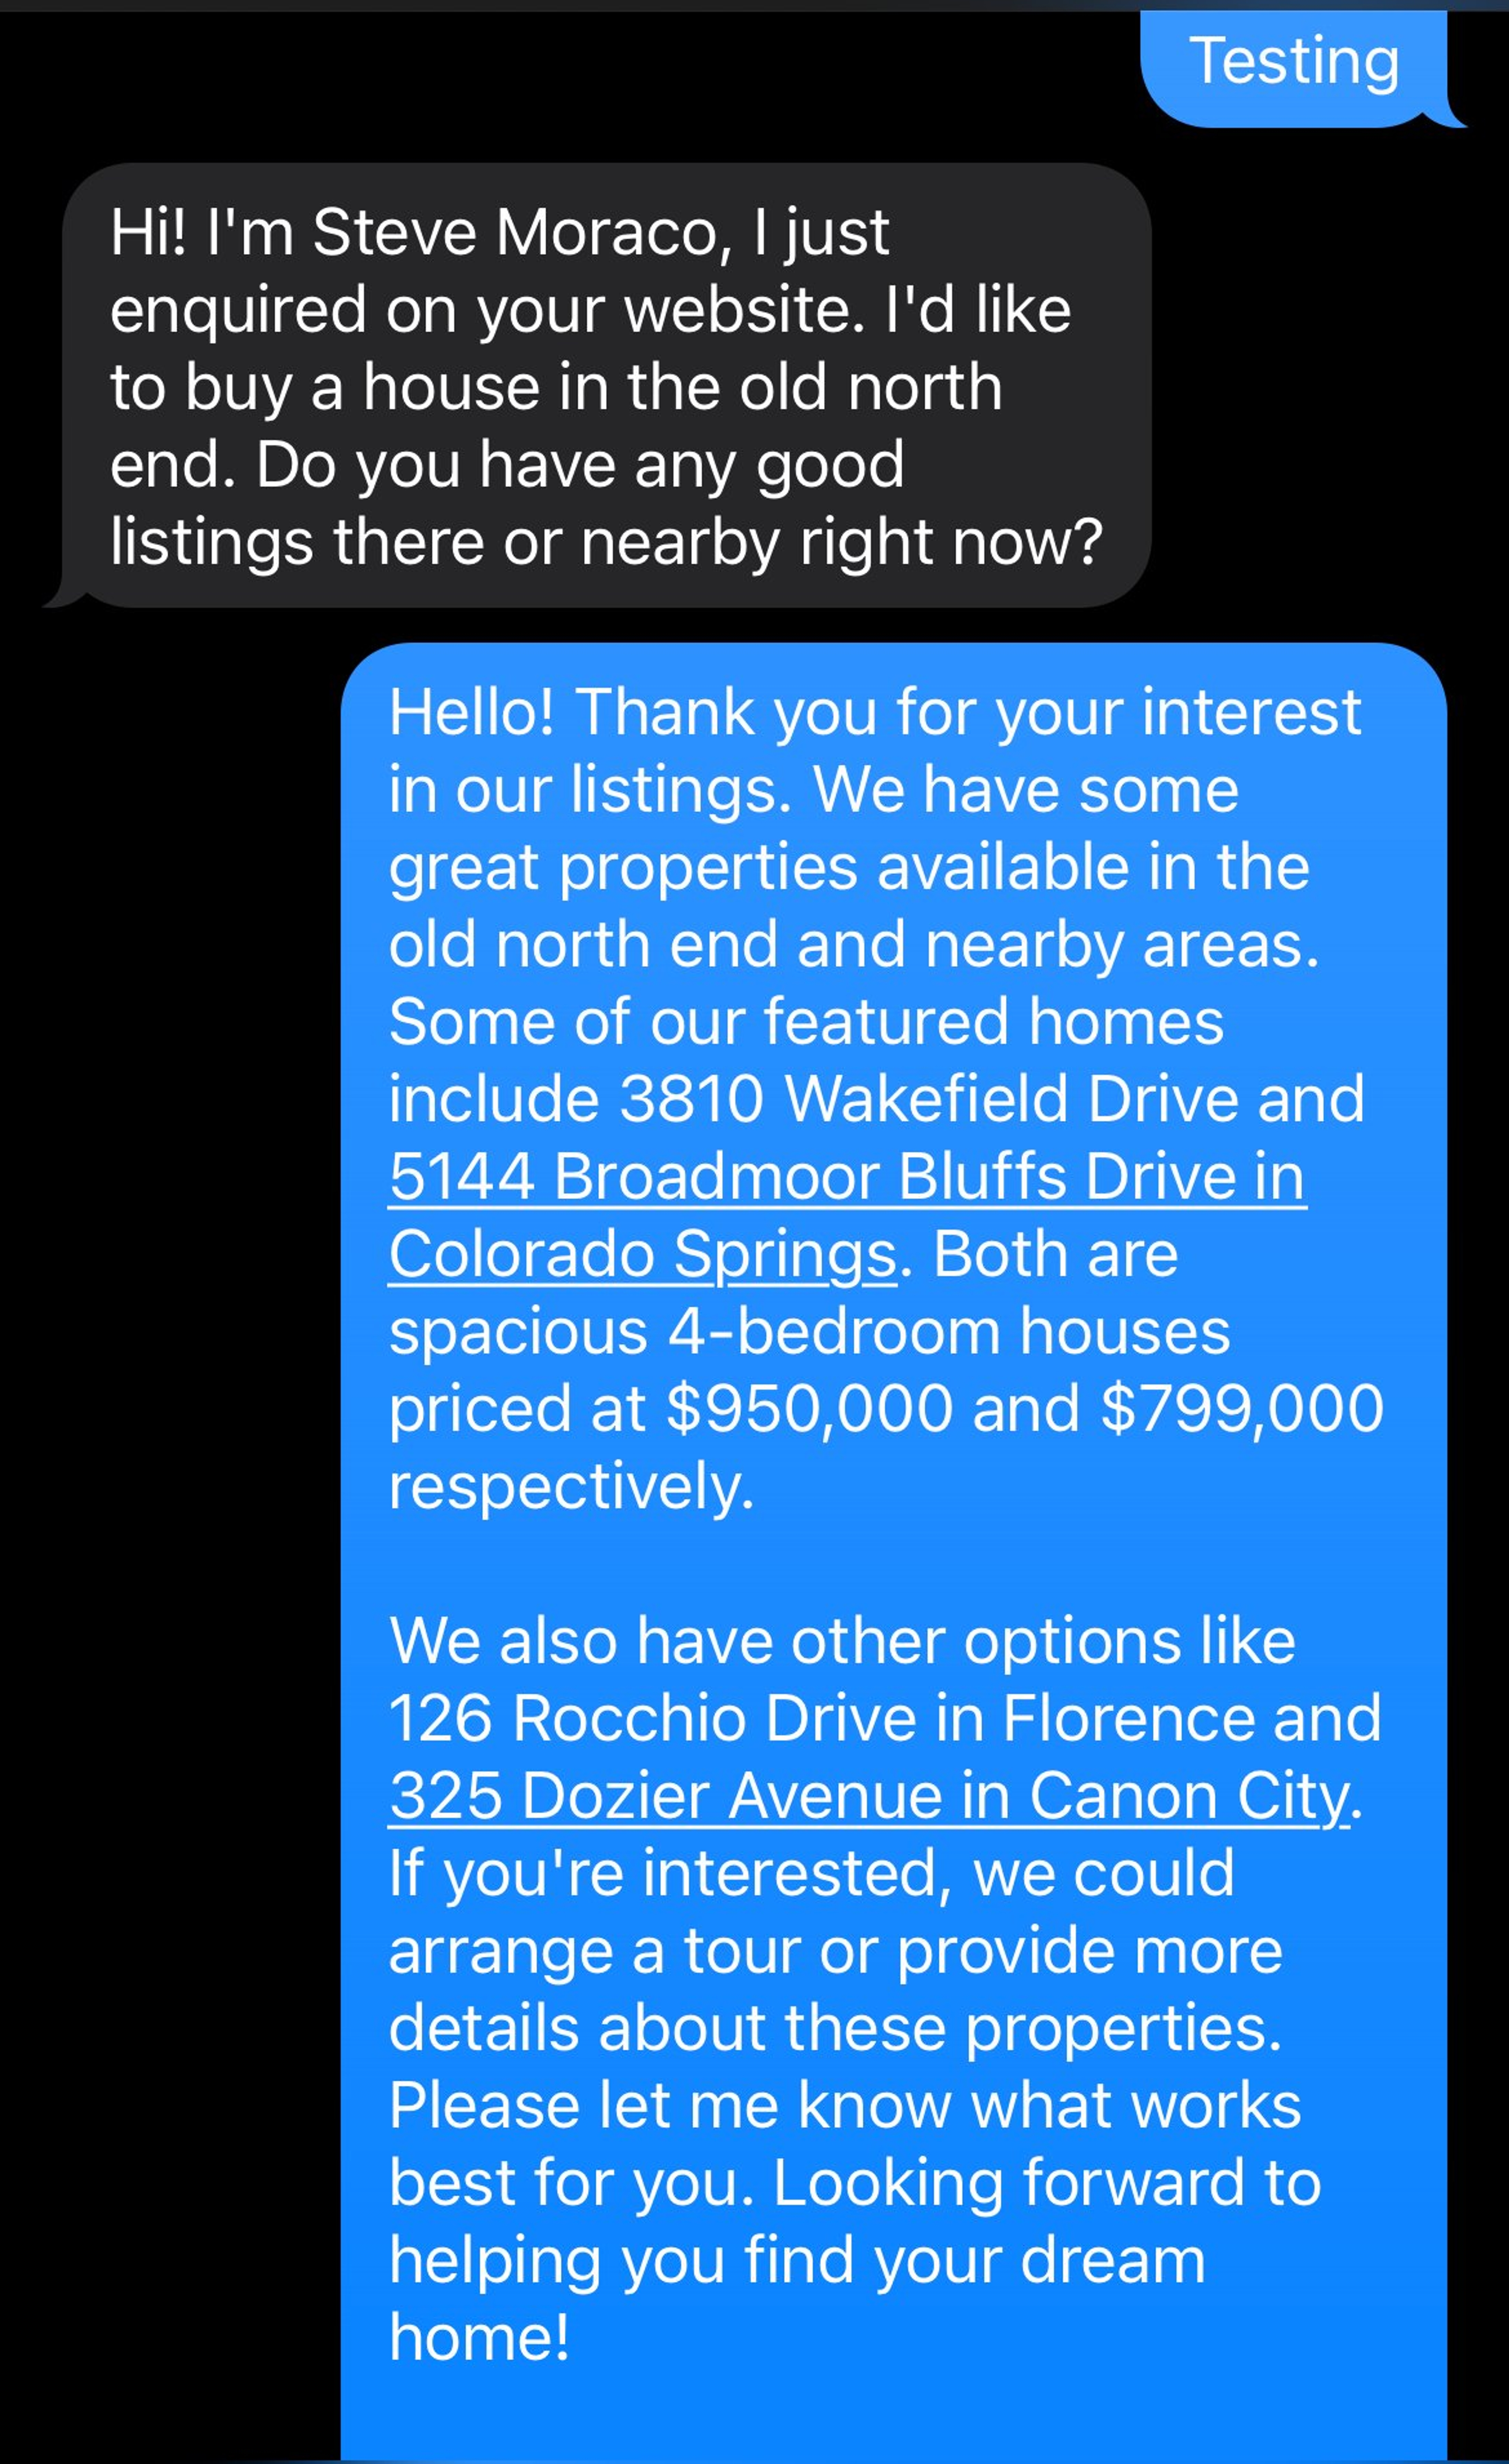 Using DATA's texting feature to reply with content from a real estate website